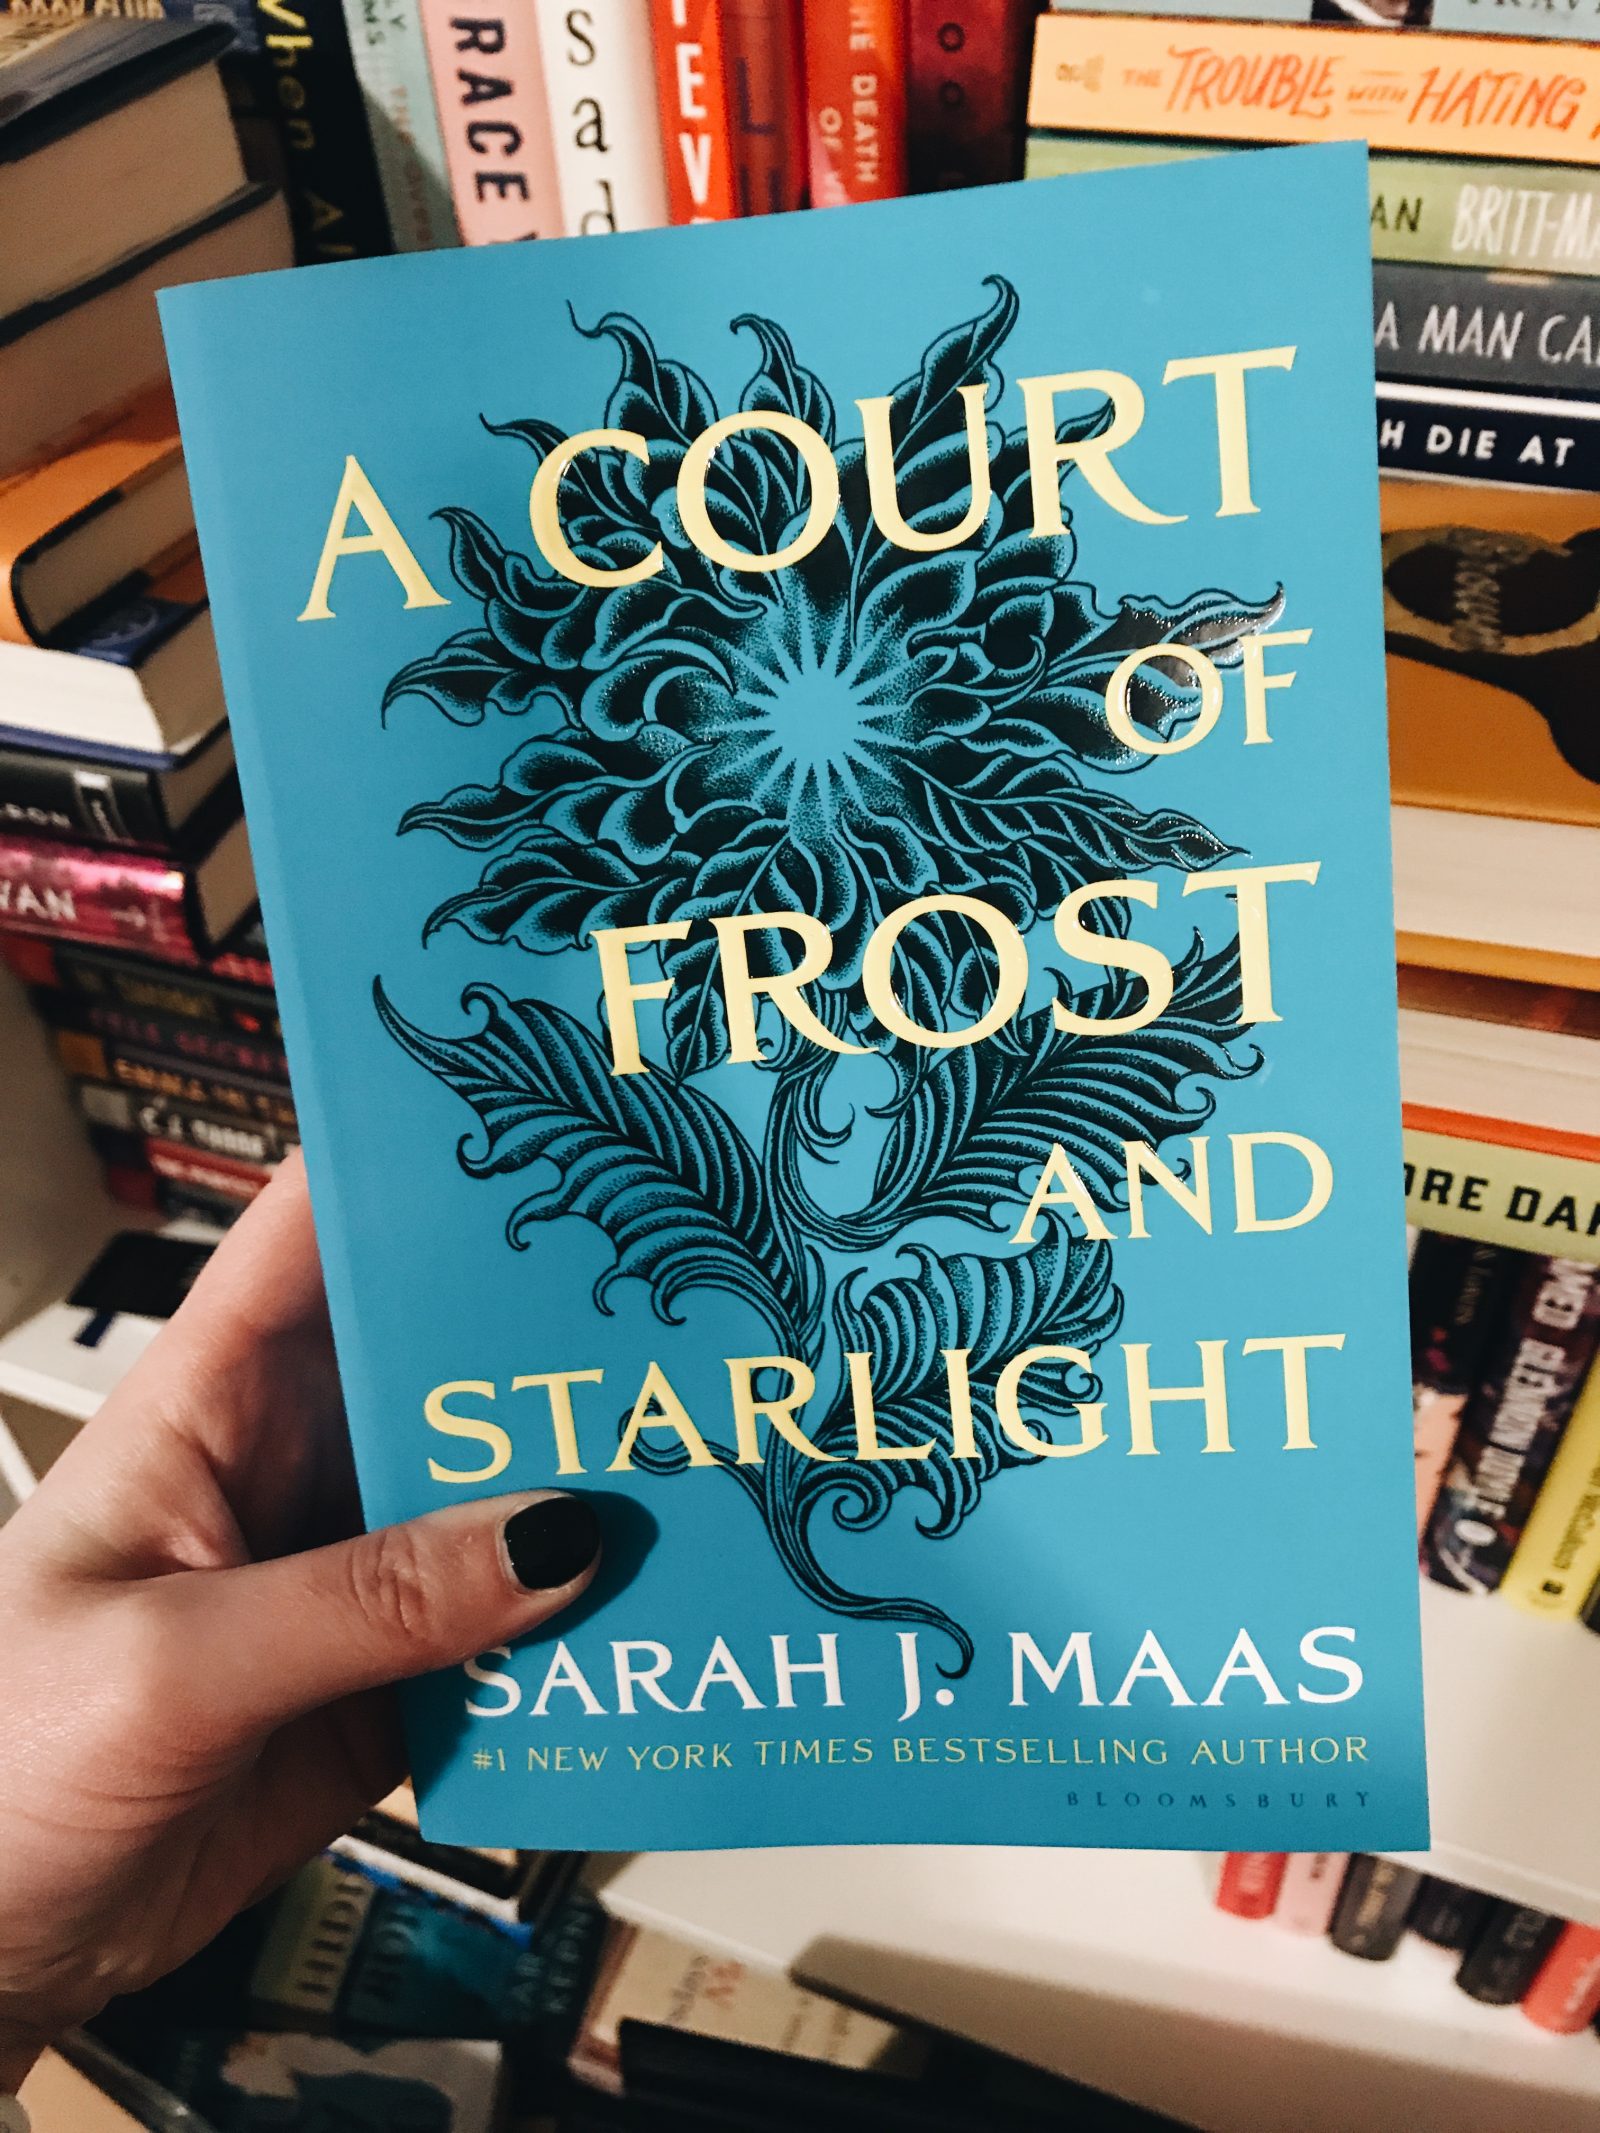 a court of frost and starlight